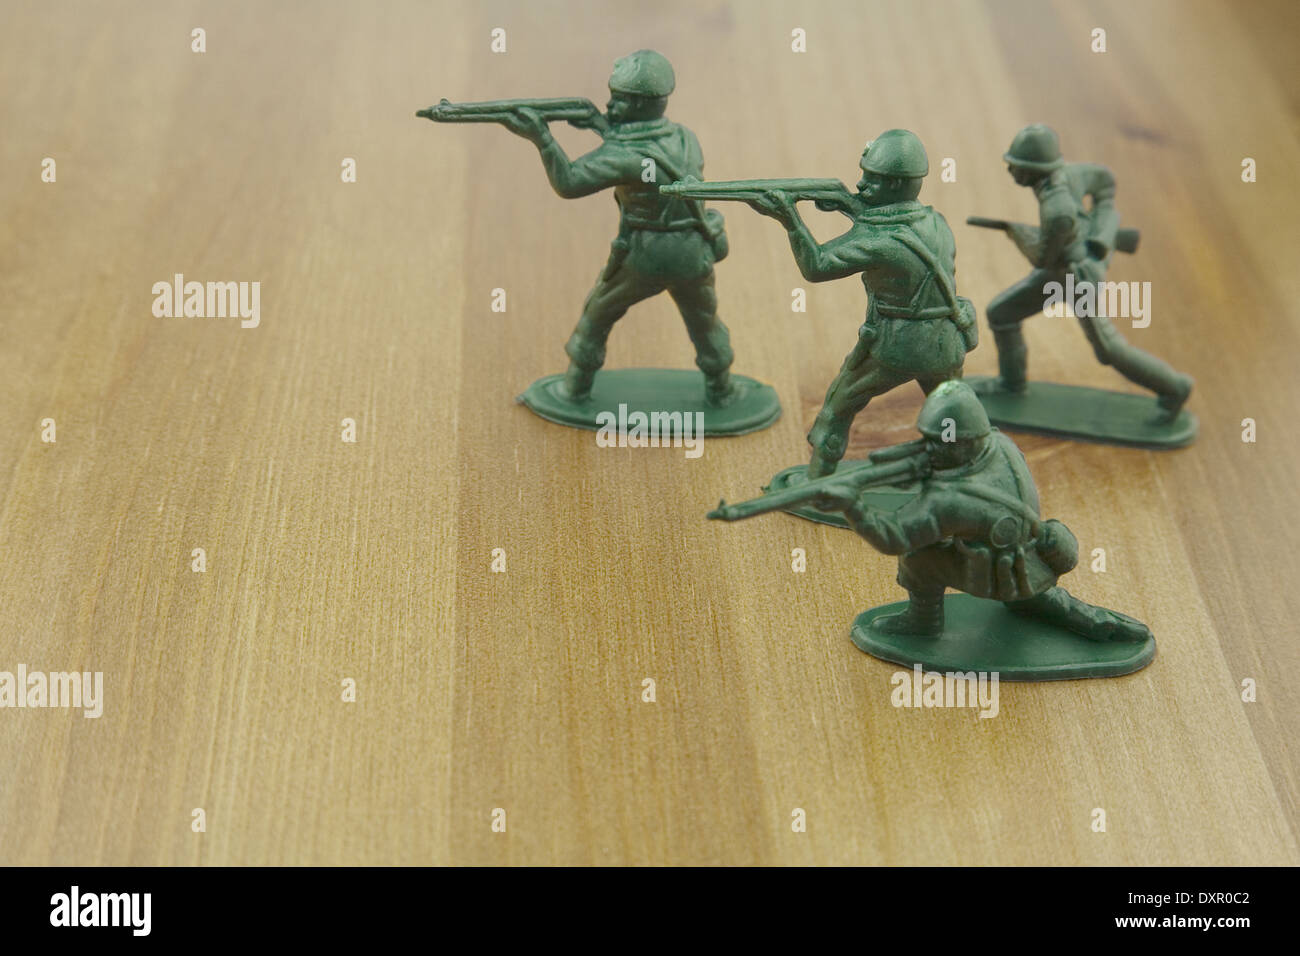 Close up shot of Plastic Toy Soldiers on a Wooden Table, Stock Photo